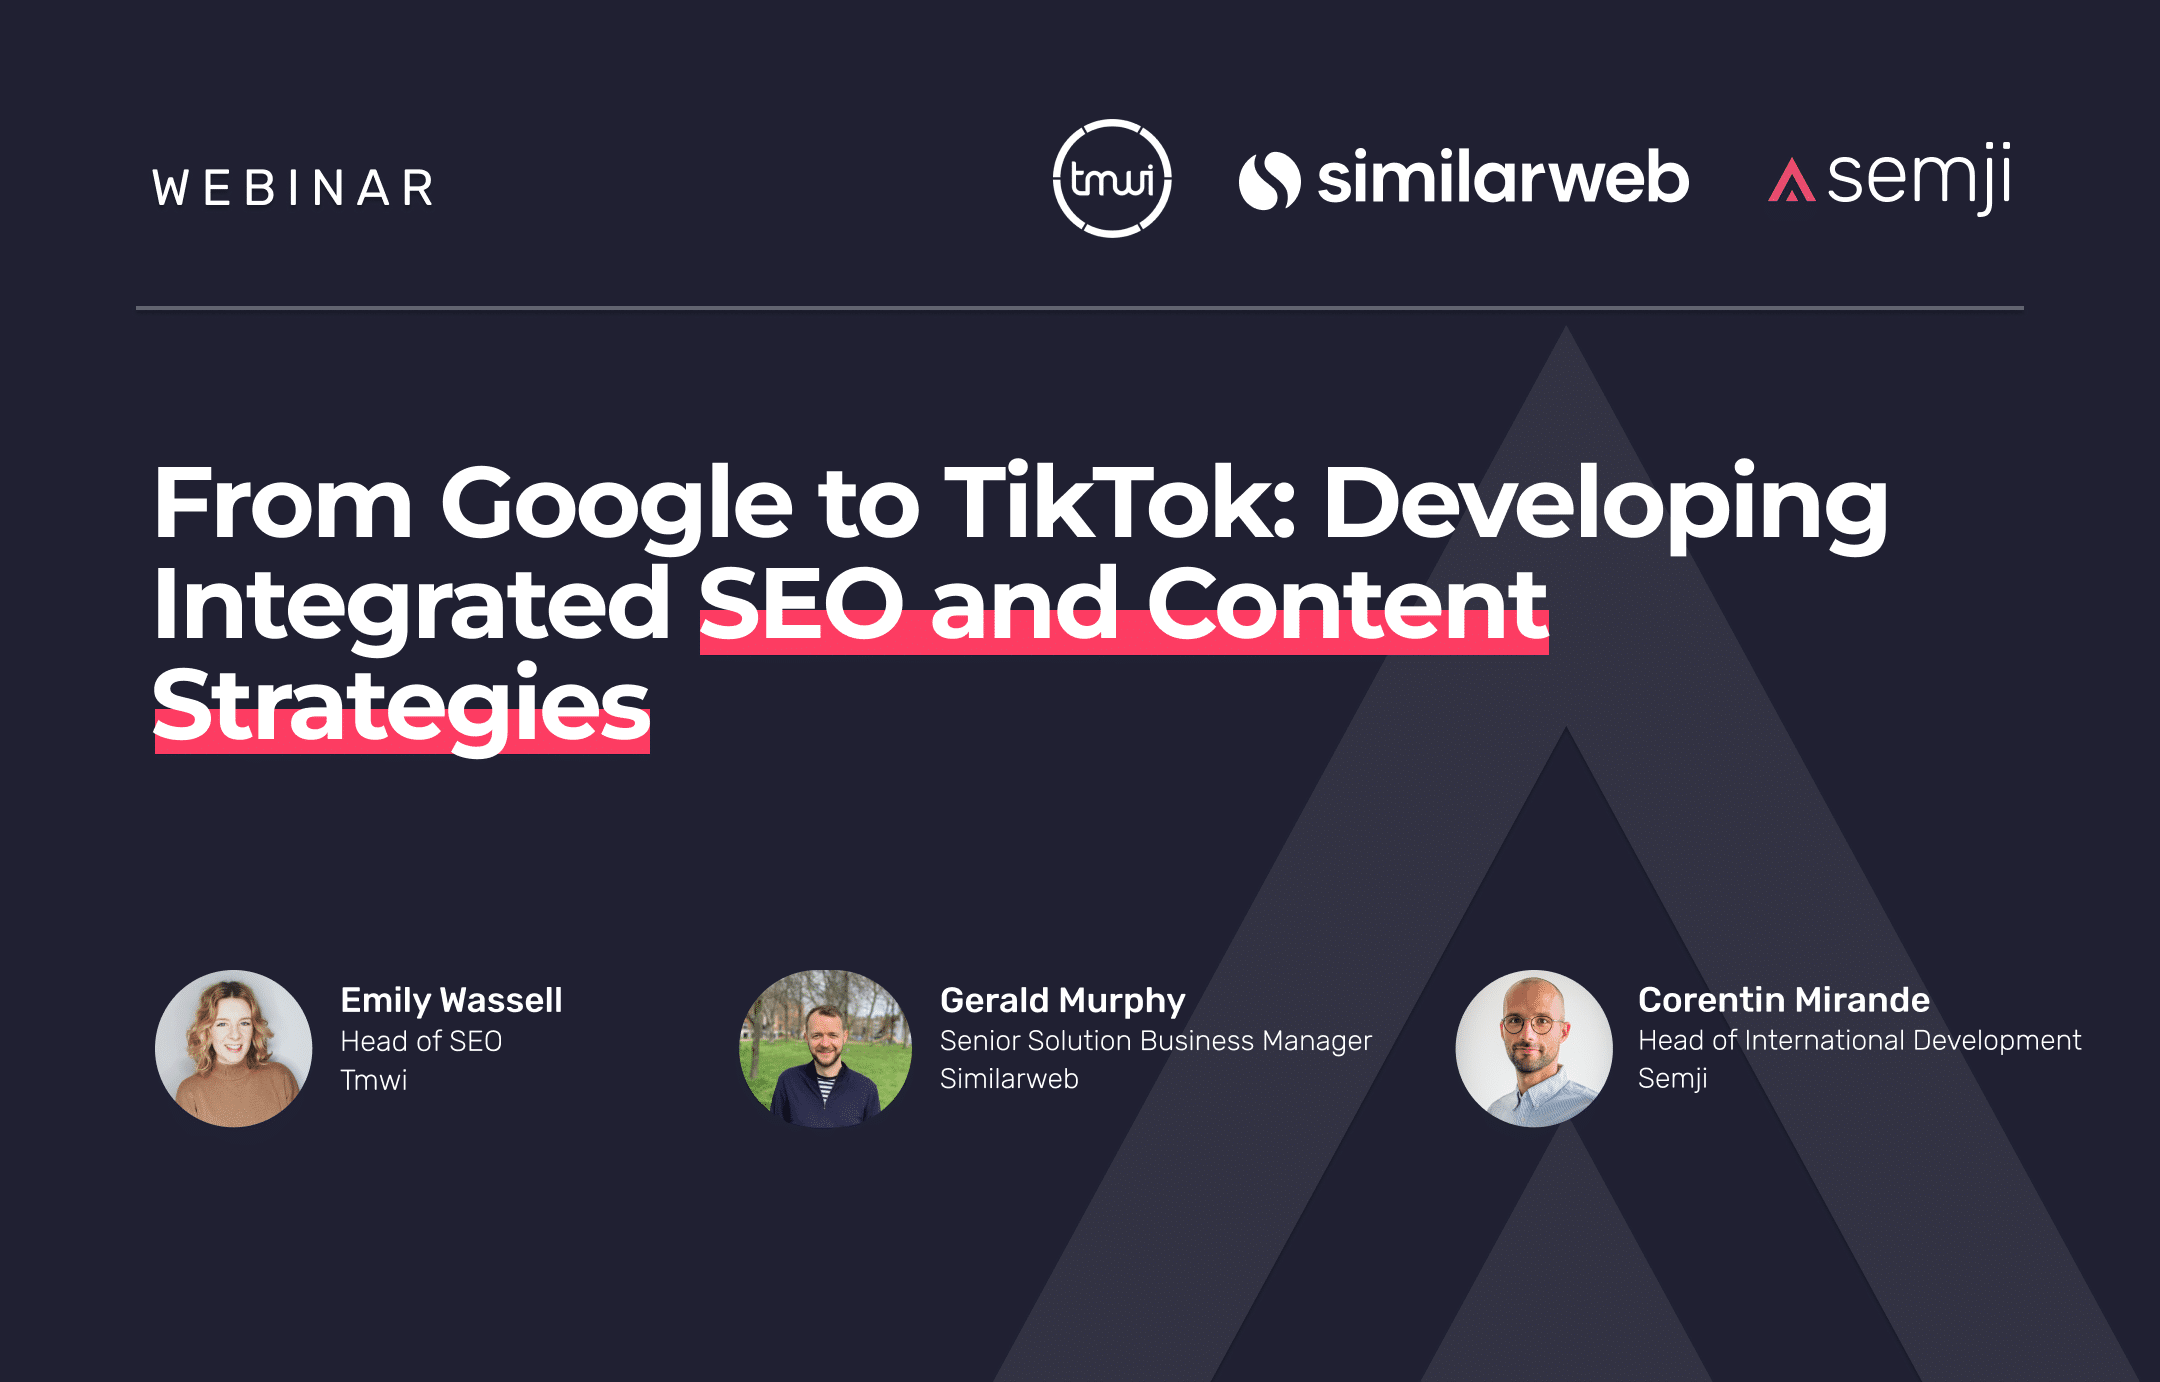 Webinar – From Google to TikTok: Developing Integrated SEO and Content Strategies